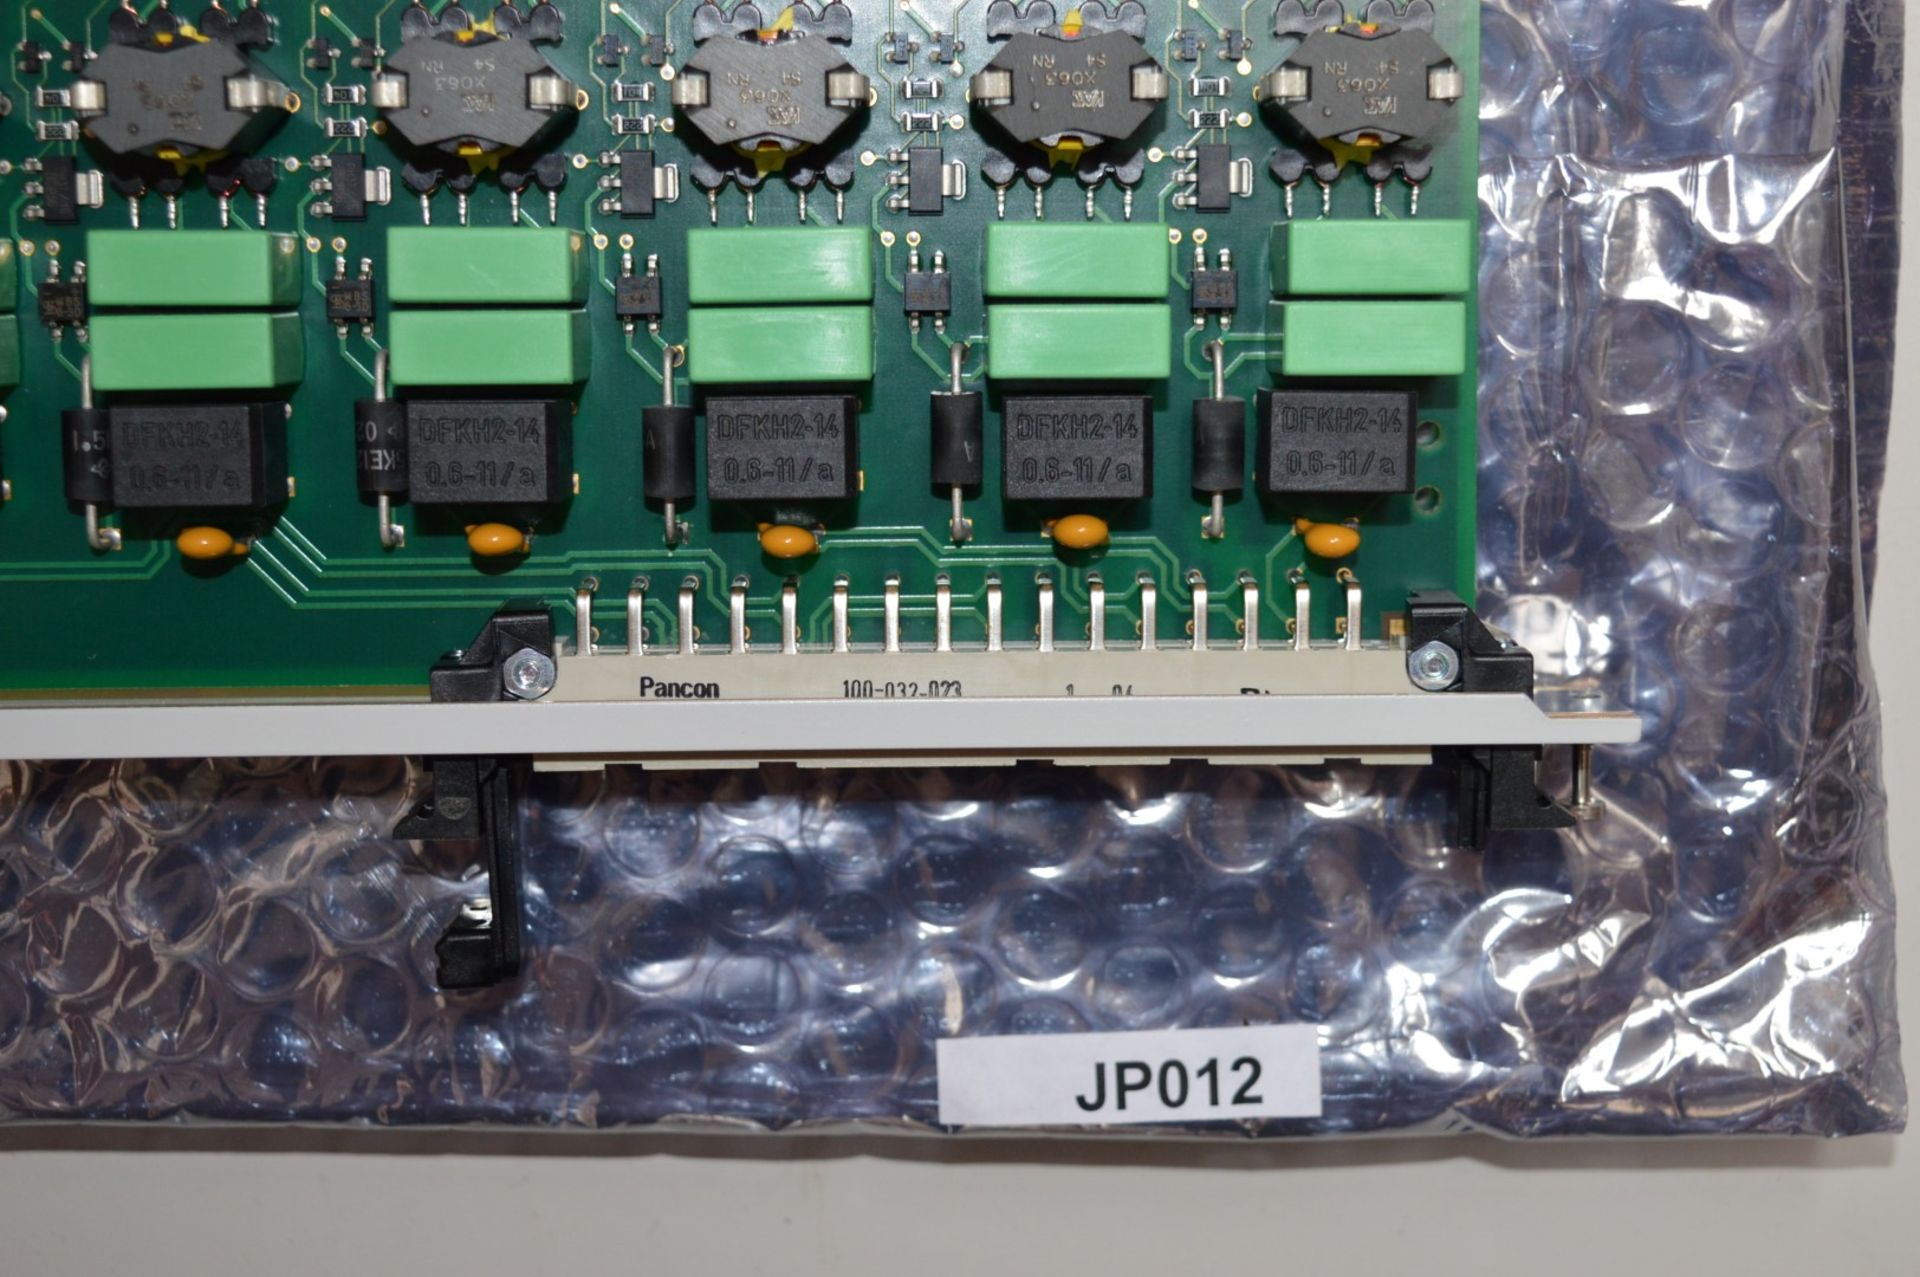 1 x Keymile 120771 Exlic Module Board - Replacement Telecommunications Part - CL300 - Ref JP012 - Lo - Image 3 of 6